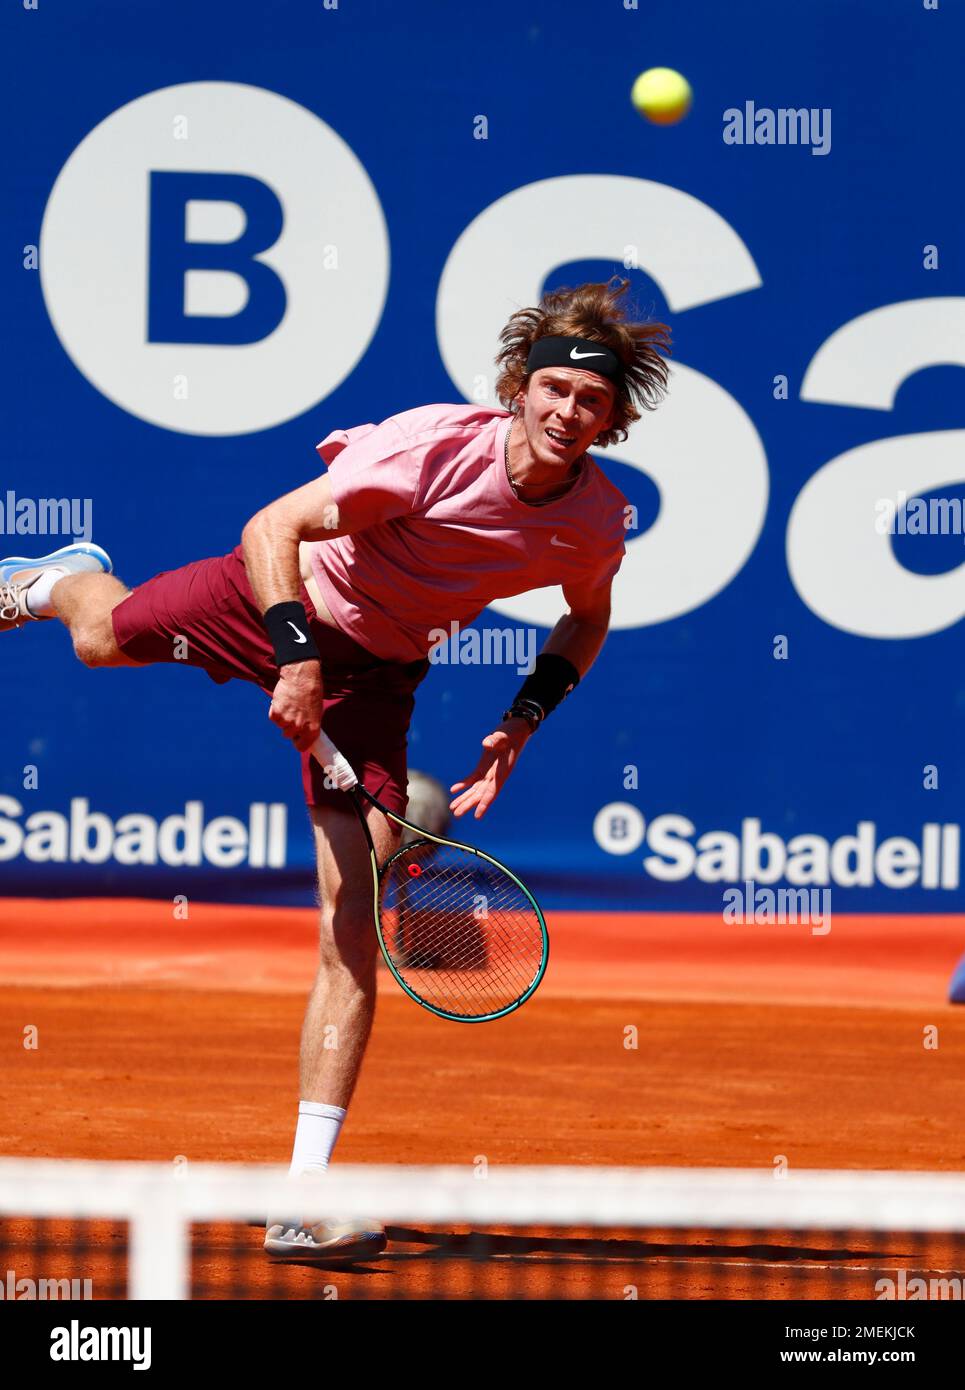 Andrey Rublev of Russia returns the ball to Jannik Sinner of Italy during a quarterfinal Godo tennis tournament in Barcelona, Spain, Friday, April 23, 2021